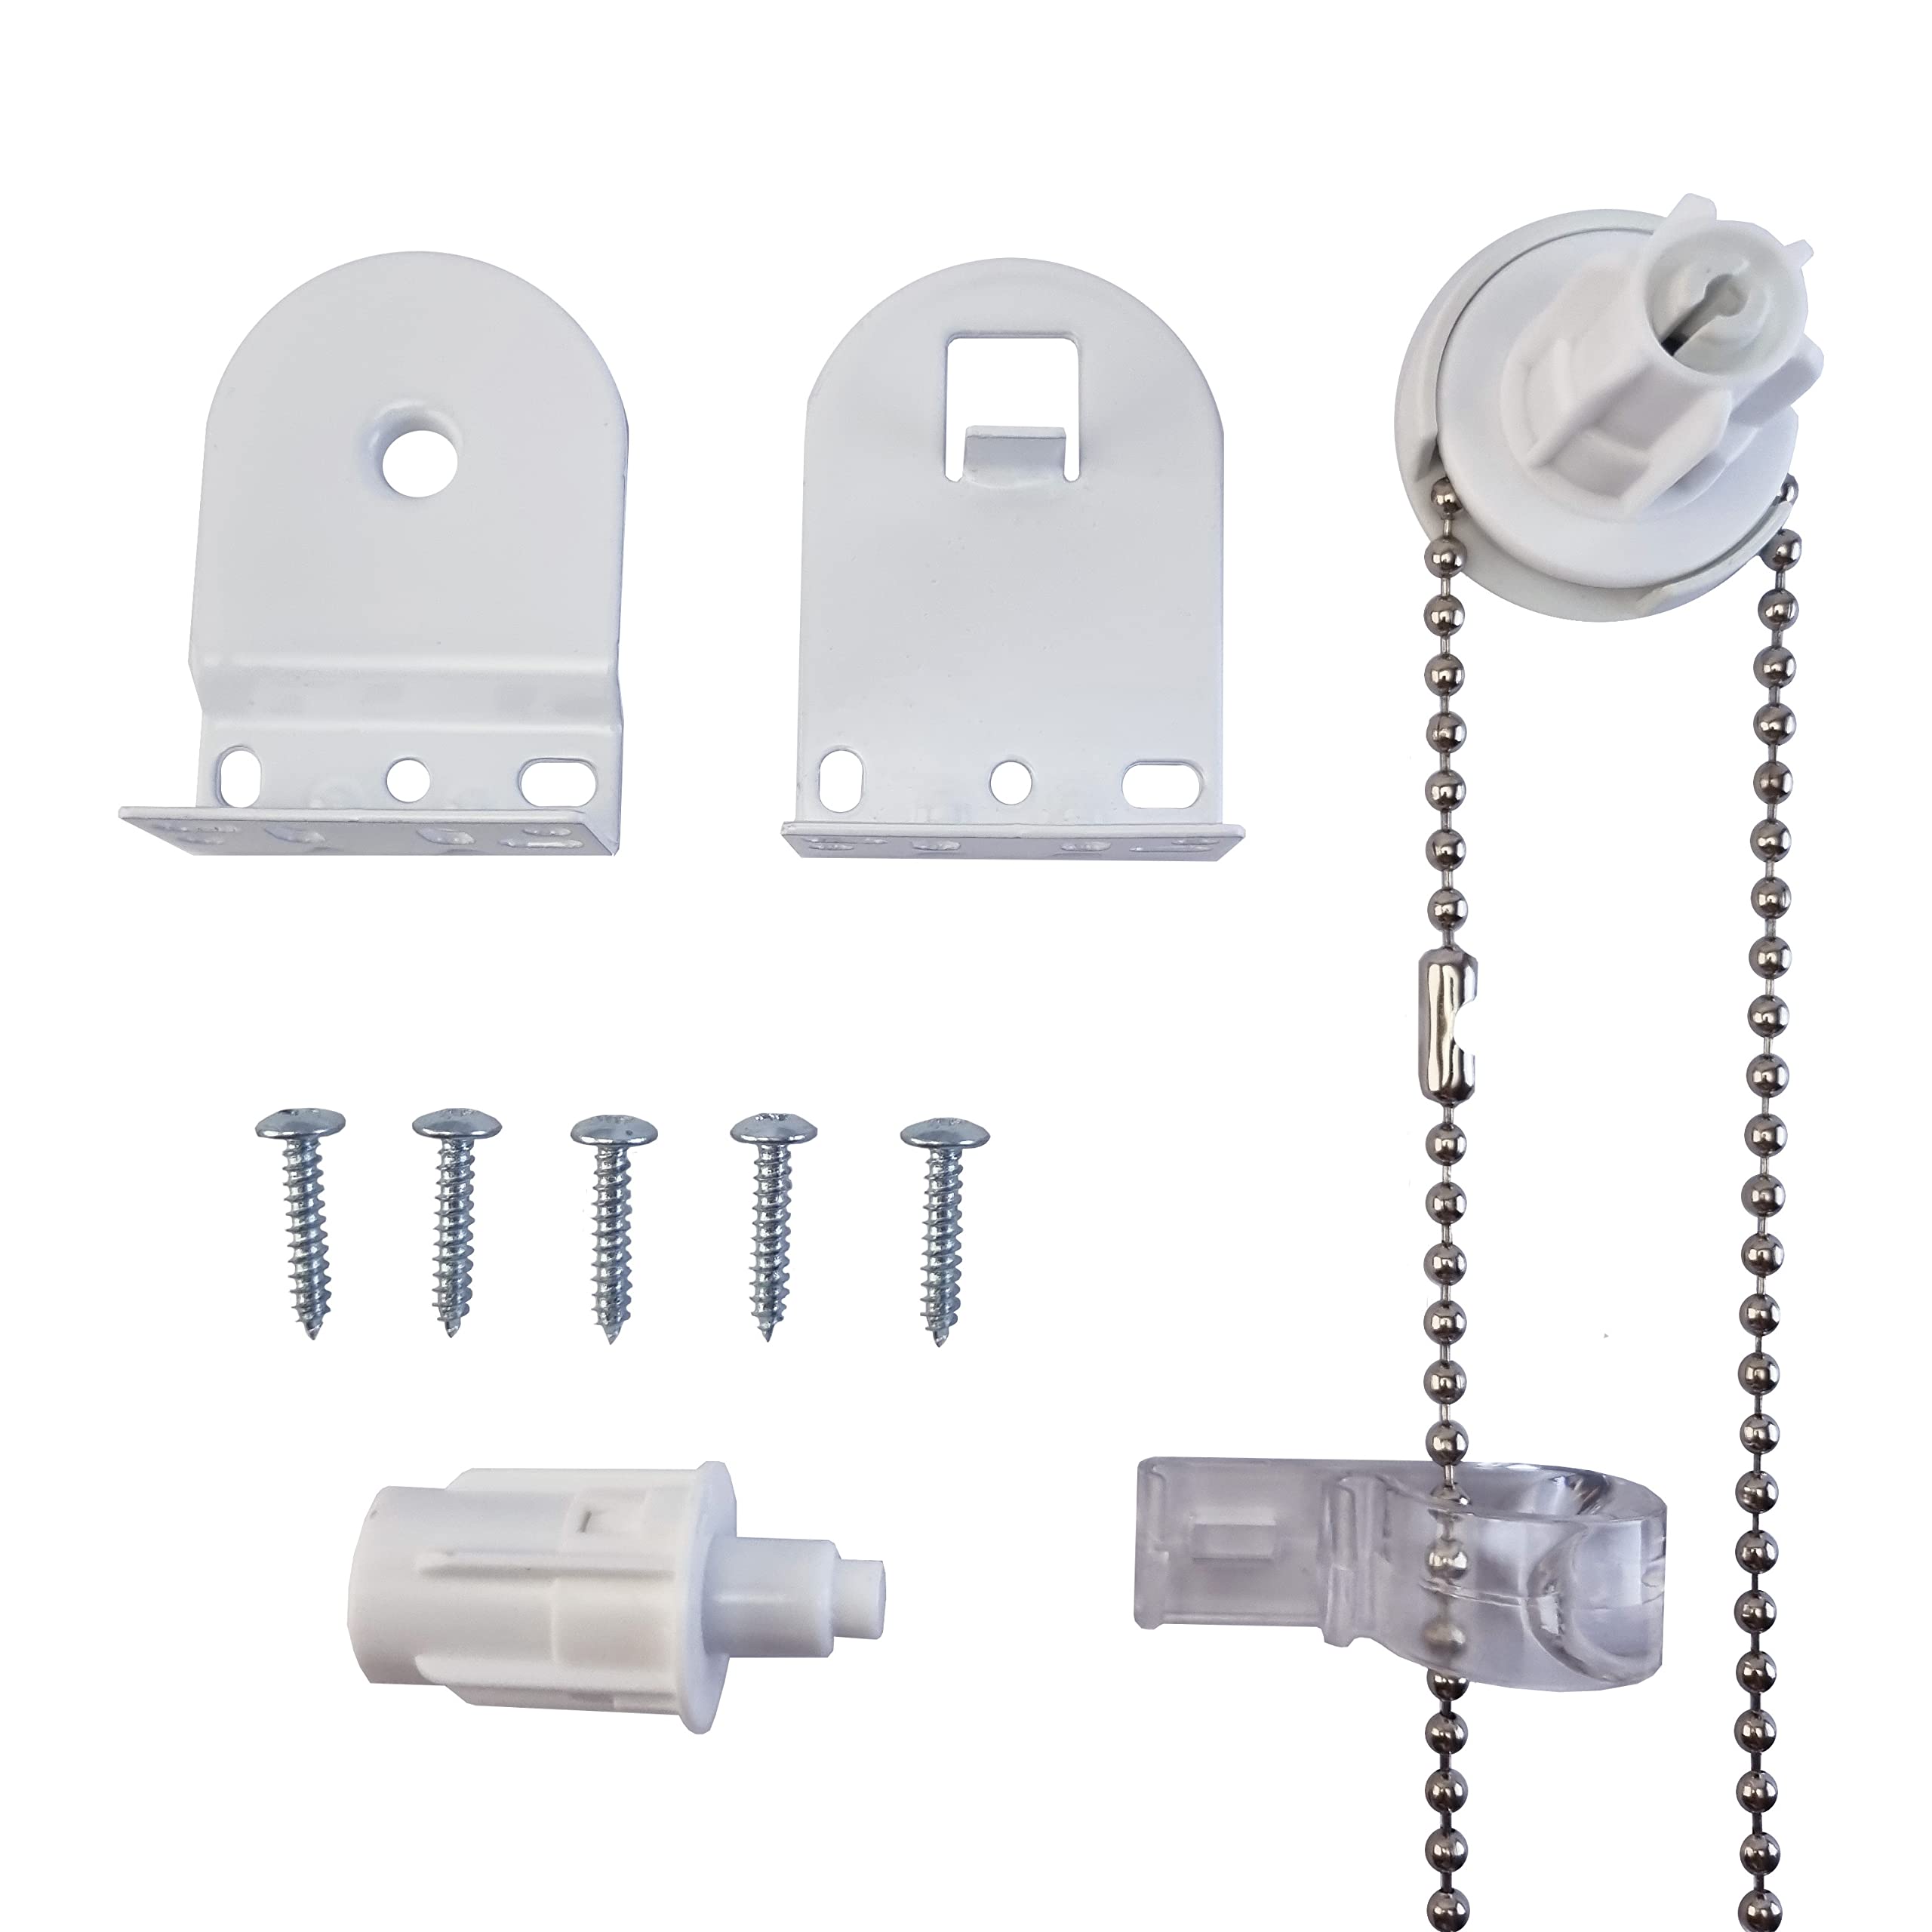 FURNISHED 25mm Quality Metal Bracket Upgrade Roller Blind Fittings Spare Kit White Heavy Duty